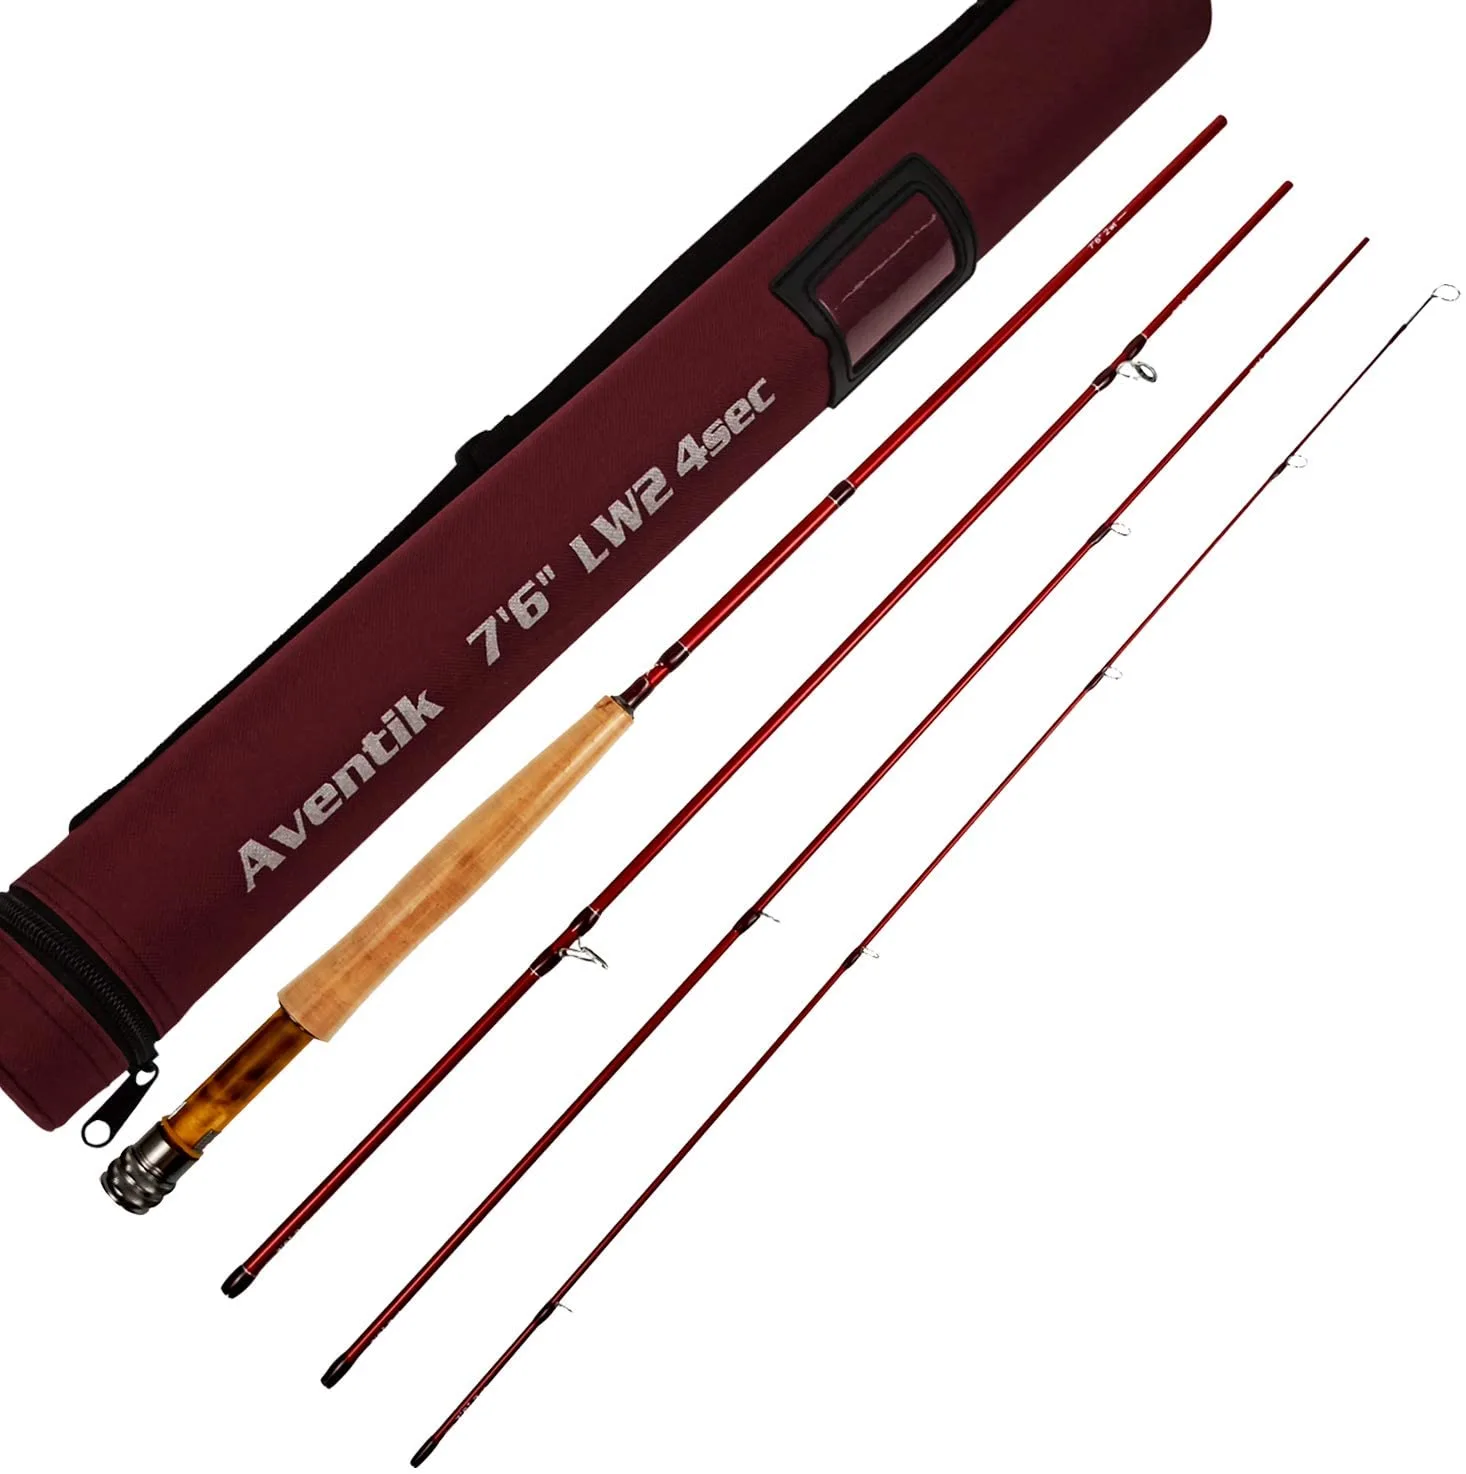  Shark Shooter Aventik Super Transparent S-Fiberglass Fly  Fishing Rod, 3wt/4wt/5wt/8wt in Red, Yellow, Brown, Blue and Orange  (Transparent Red, 7'8'' LW4 4SEC) : Sports & Outdoors